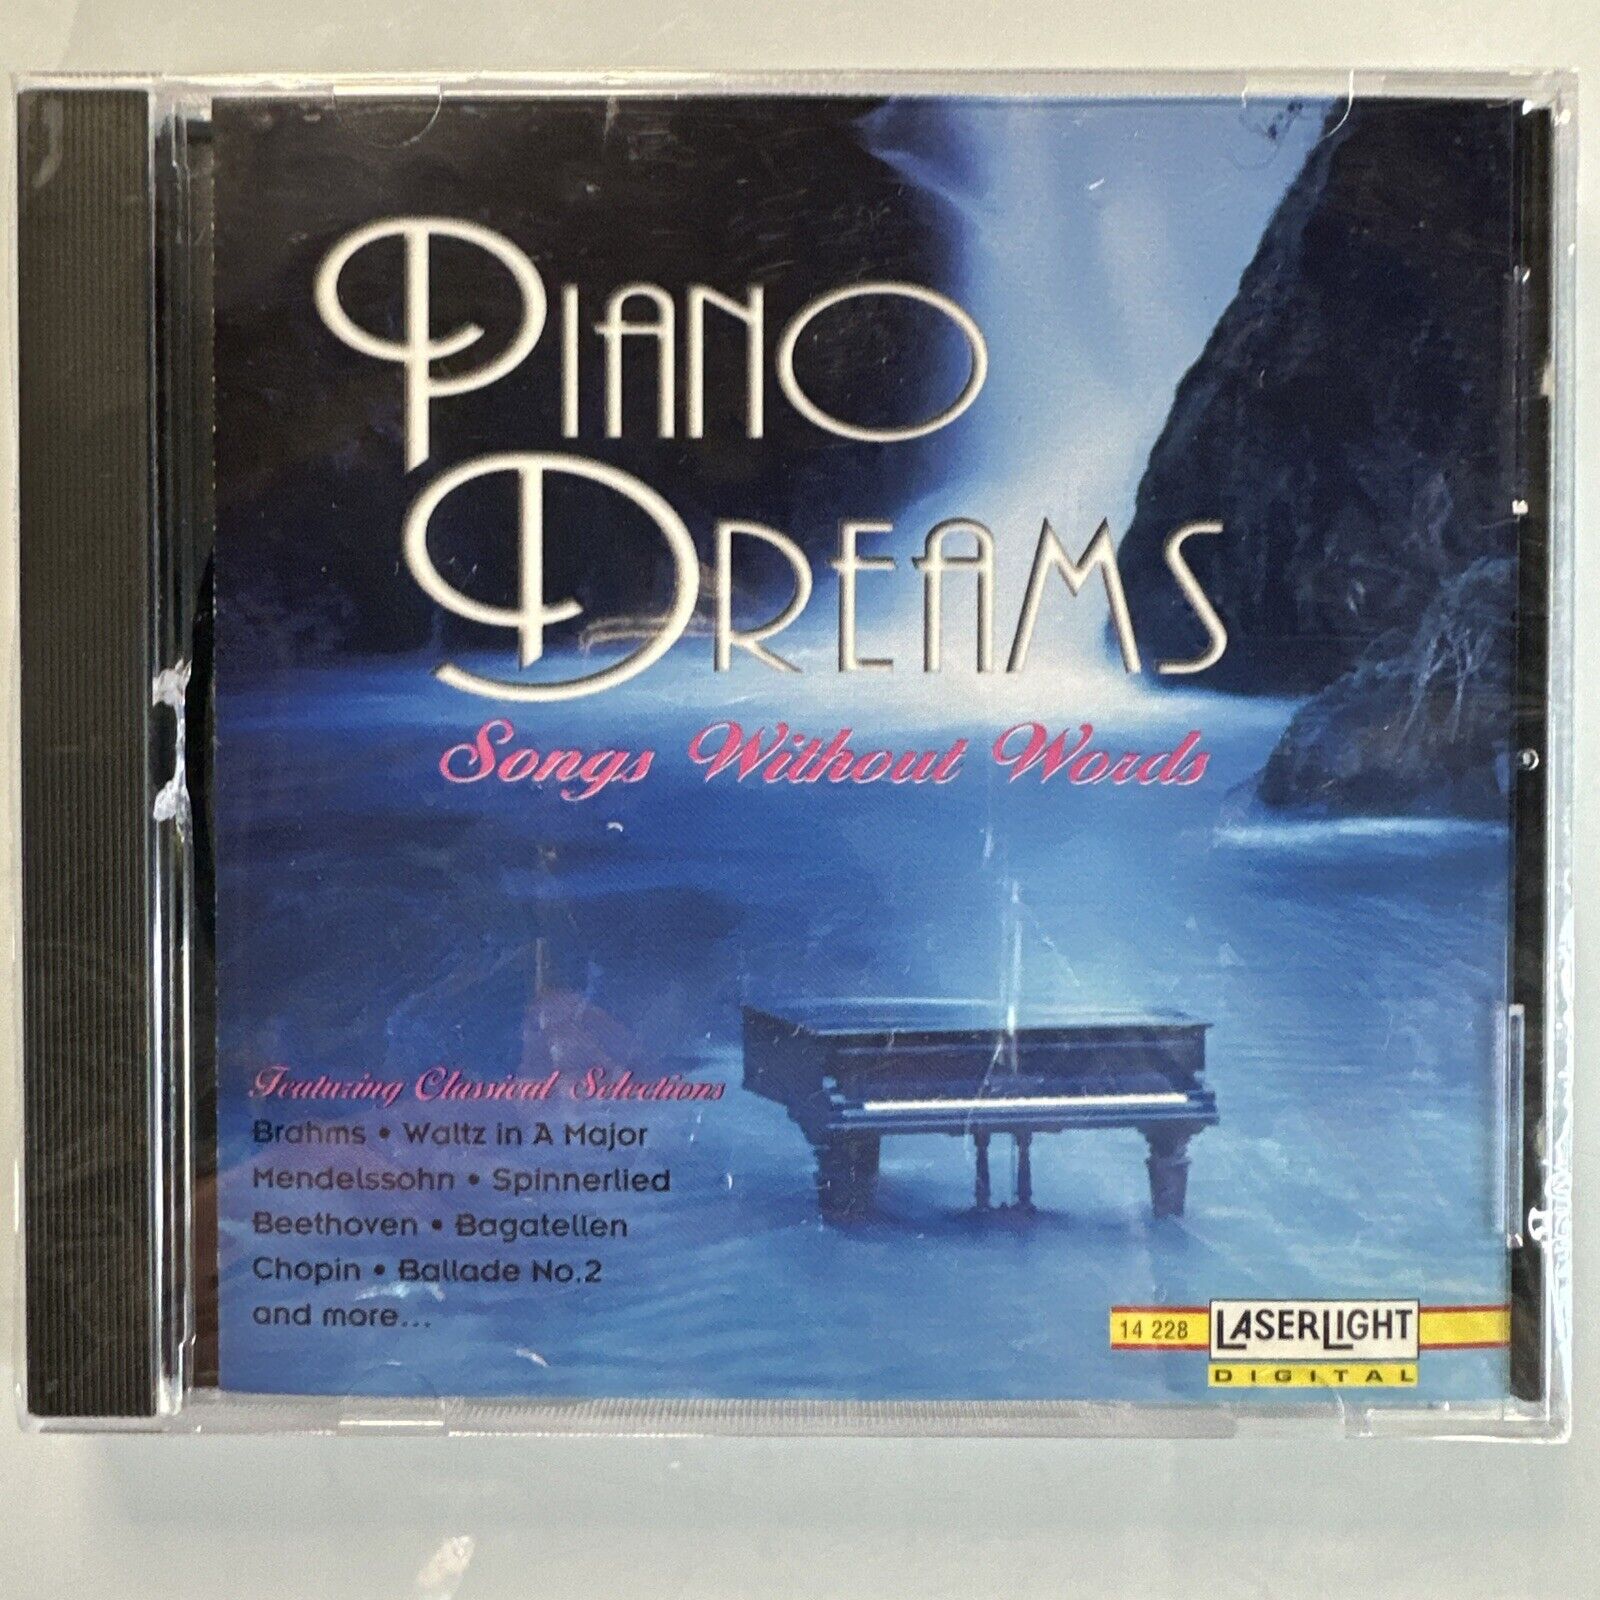 Piano Dreams: Songs Without Words (CD, Mar-1996, Laserlight) New Sealed